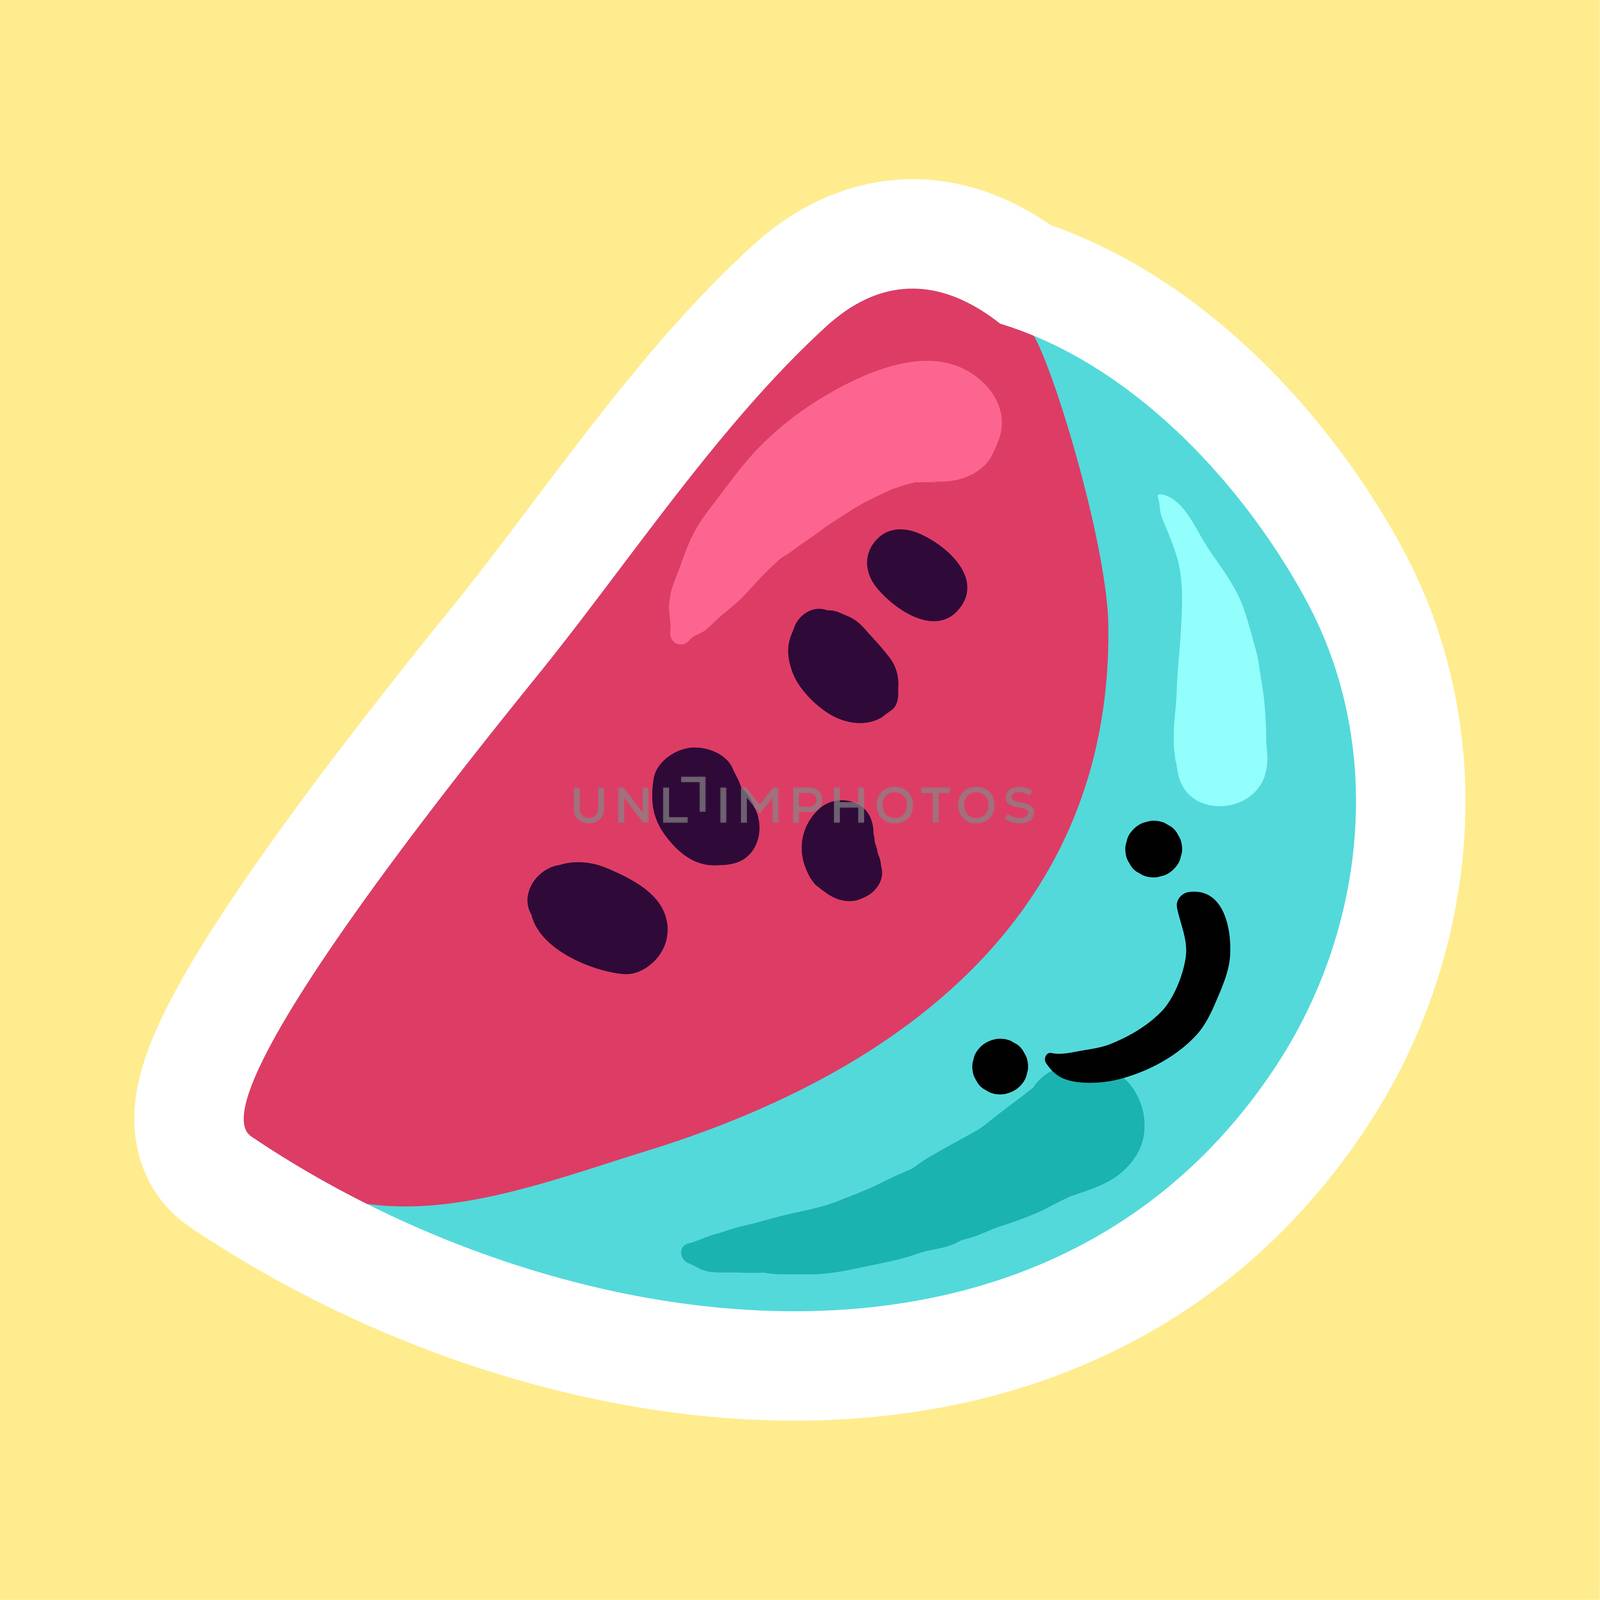 Cheerful smiling watermelon by barsrsind